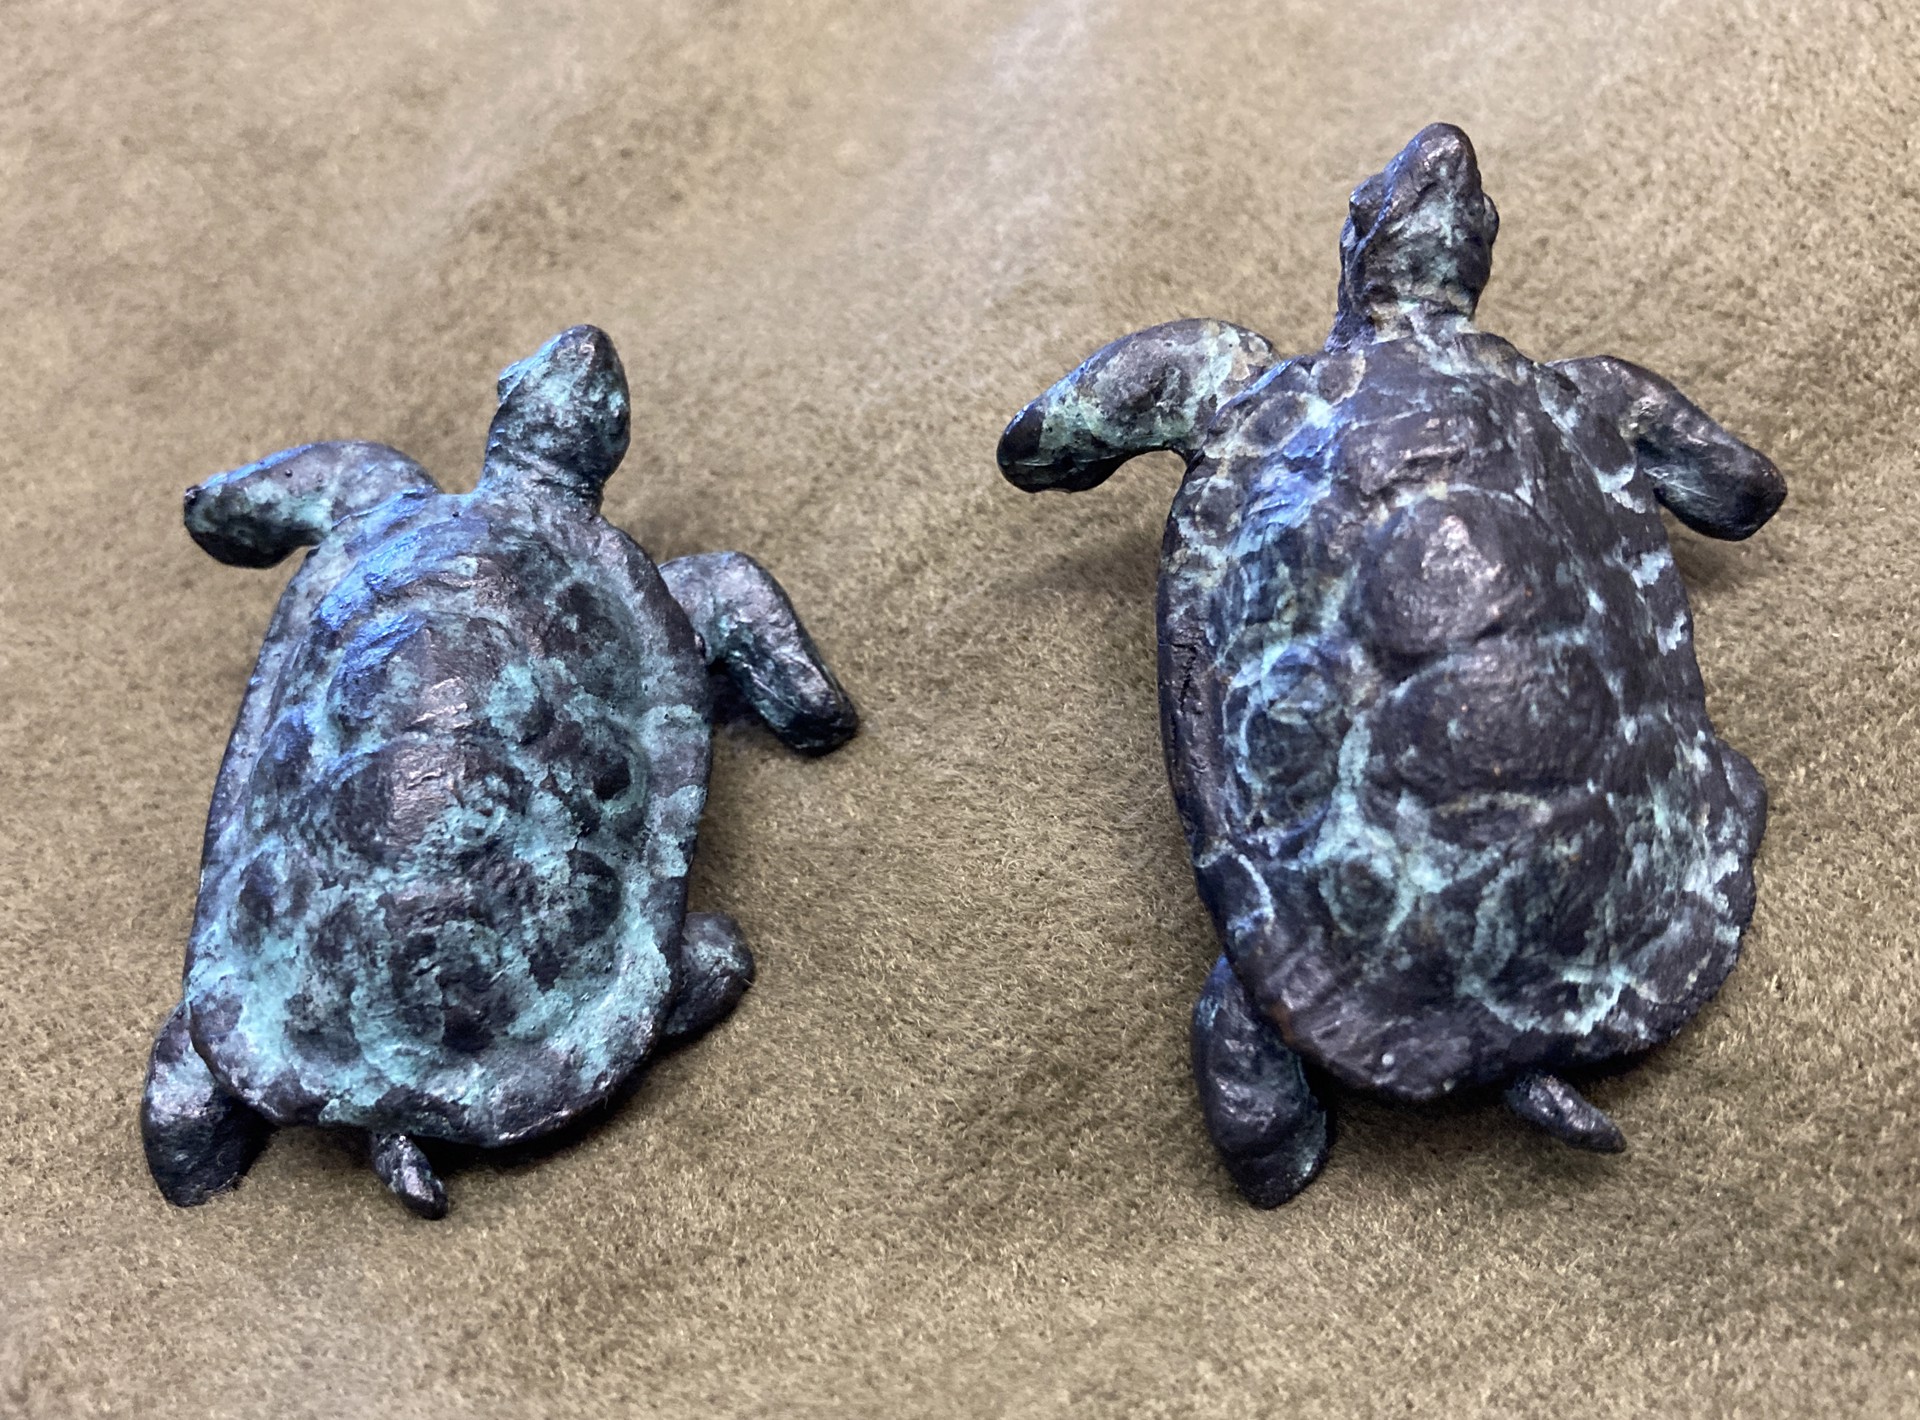 Pair of Turtles by Rob Pitzer's Private Collection